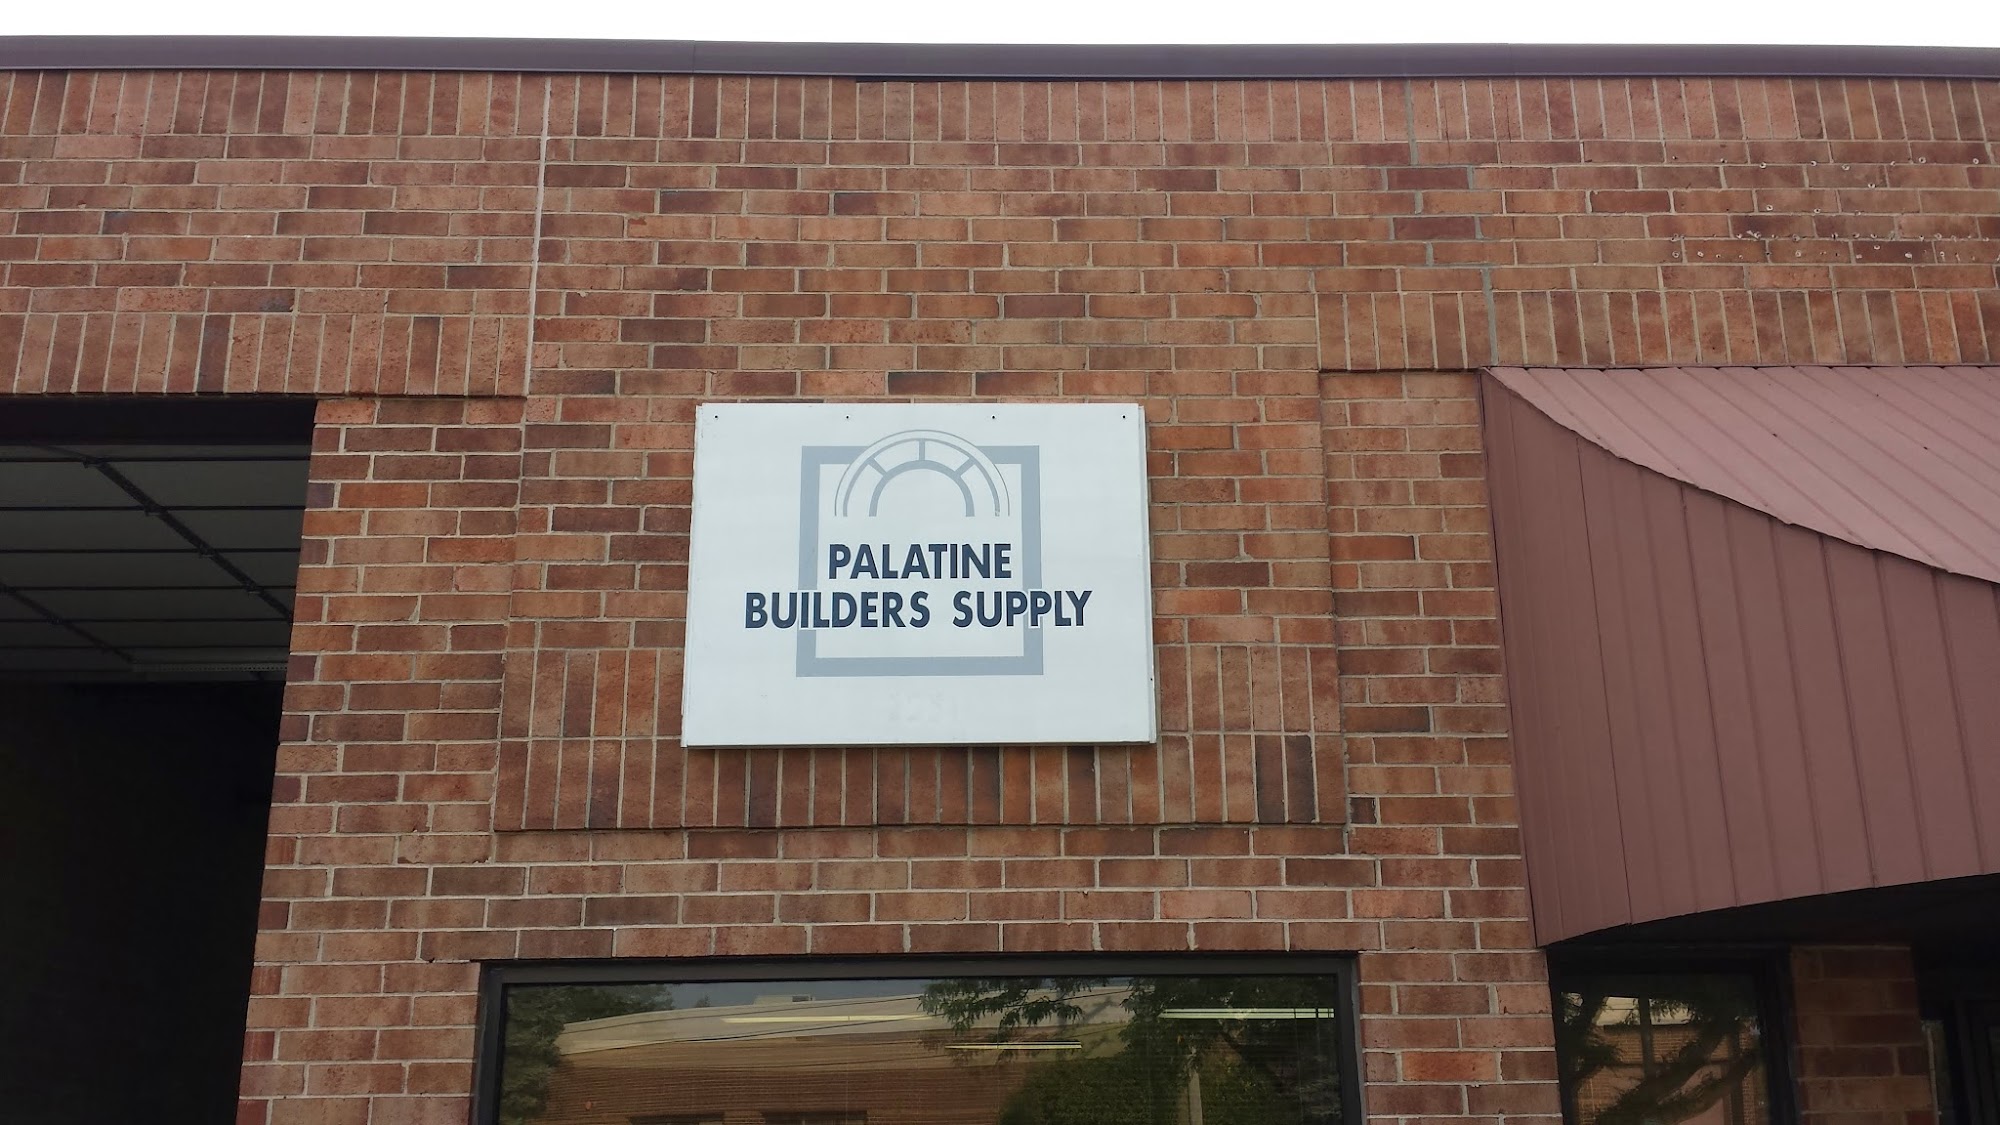 Palatine Builders Supply, Inc 827 N Central Ave, Wood Dale Illinois 60191